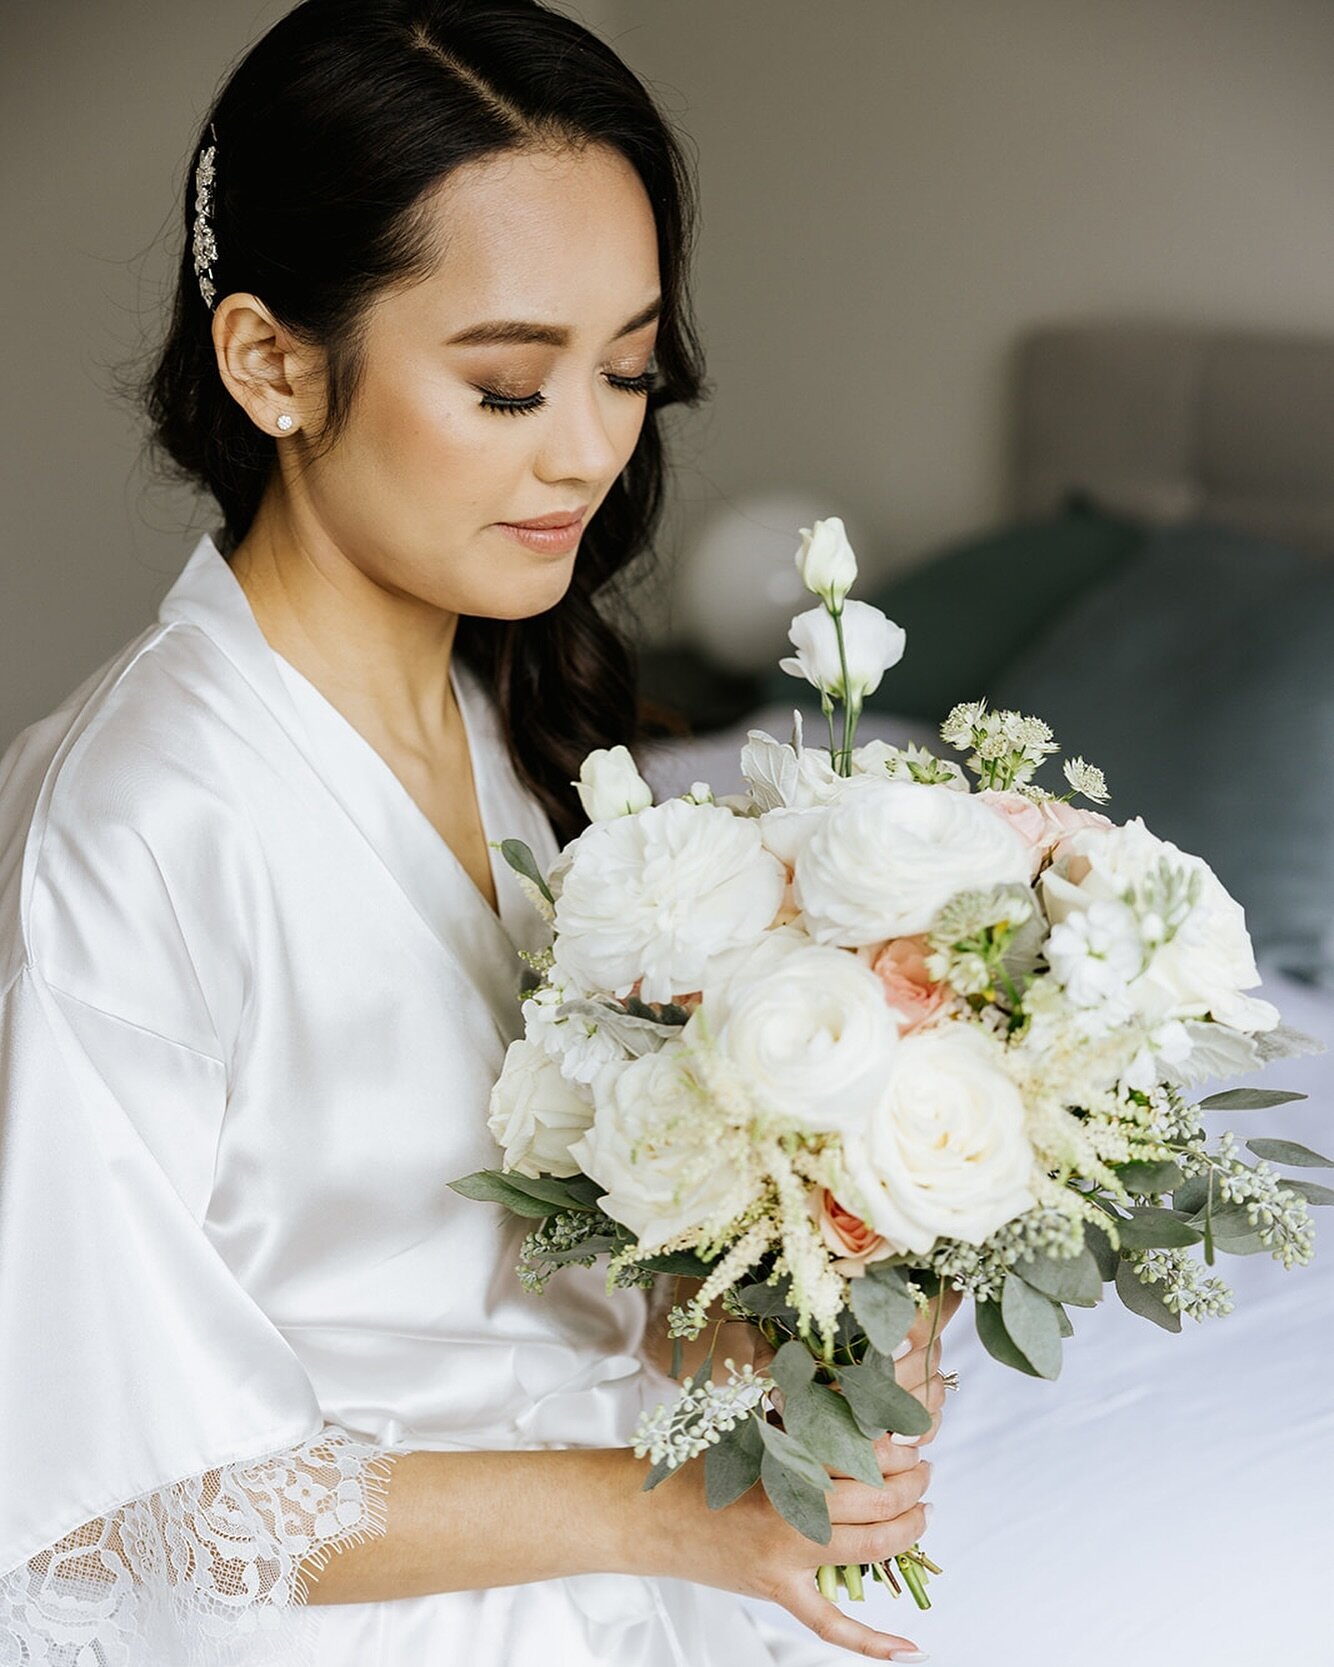 It&rsquo;s giving perfect 🤍

Photography | @ashley_daphne
Venue | @thecommonsyyc
Florist | @lebouquetfloral
MUA | @lorrainemakeupartistry 
Hair | @hair.kfong
Wedding Dress | @thebridalboutiqueyyc
Caterer | @romacateringyyc
DJ | @beatsonthedl 

*
Lux